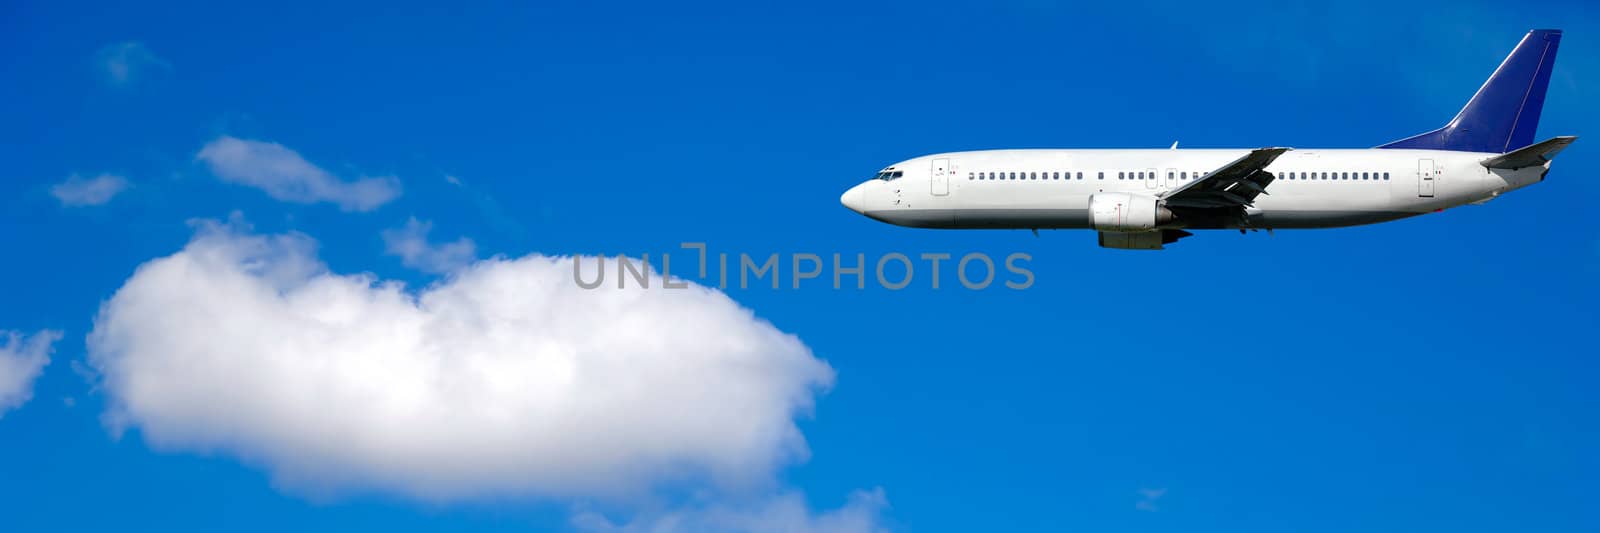 Air travel - Plane and cloud on blue sky